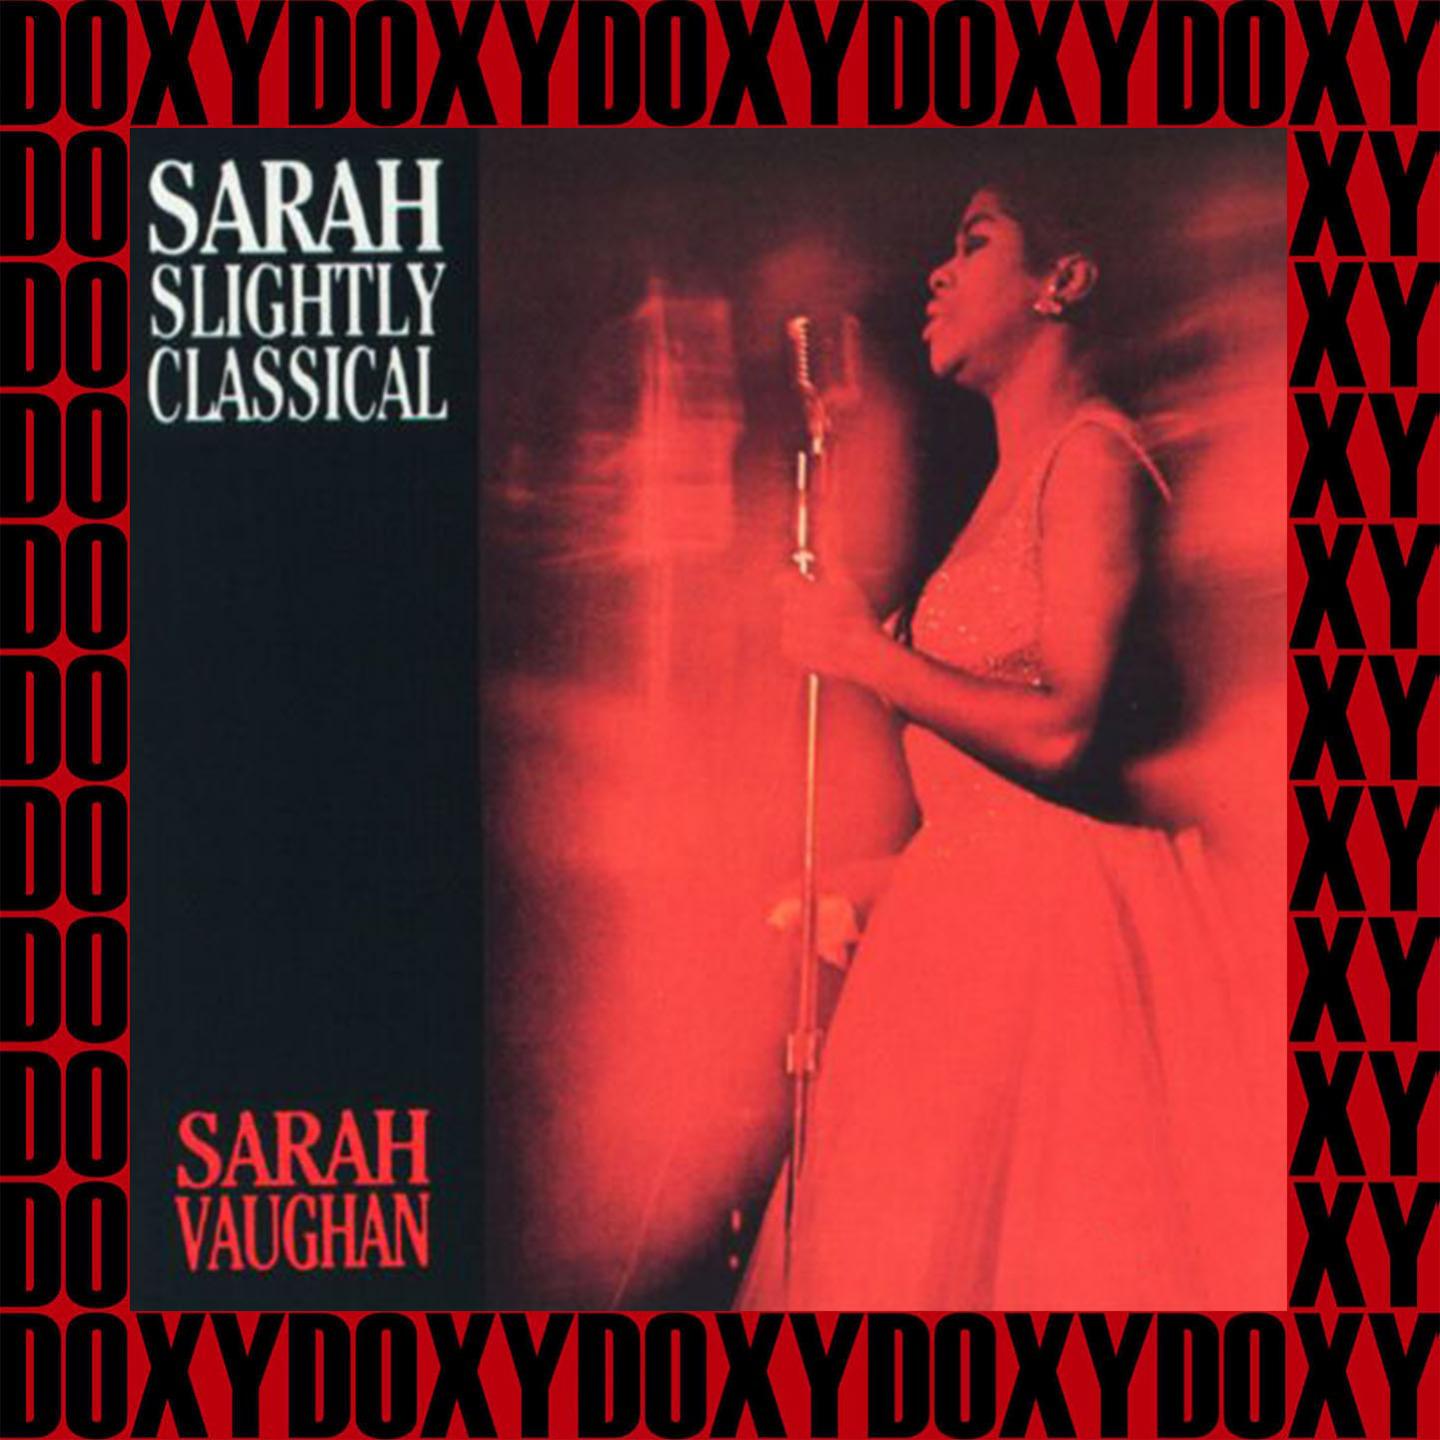 Sarah Slightly Classical (Remastered Version) (Doxy Collection)